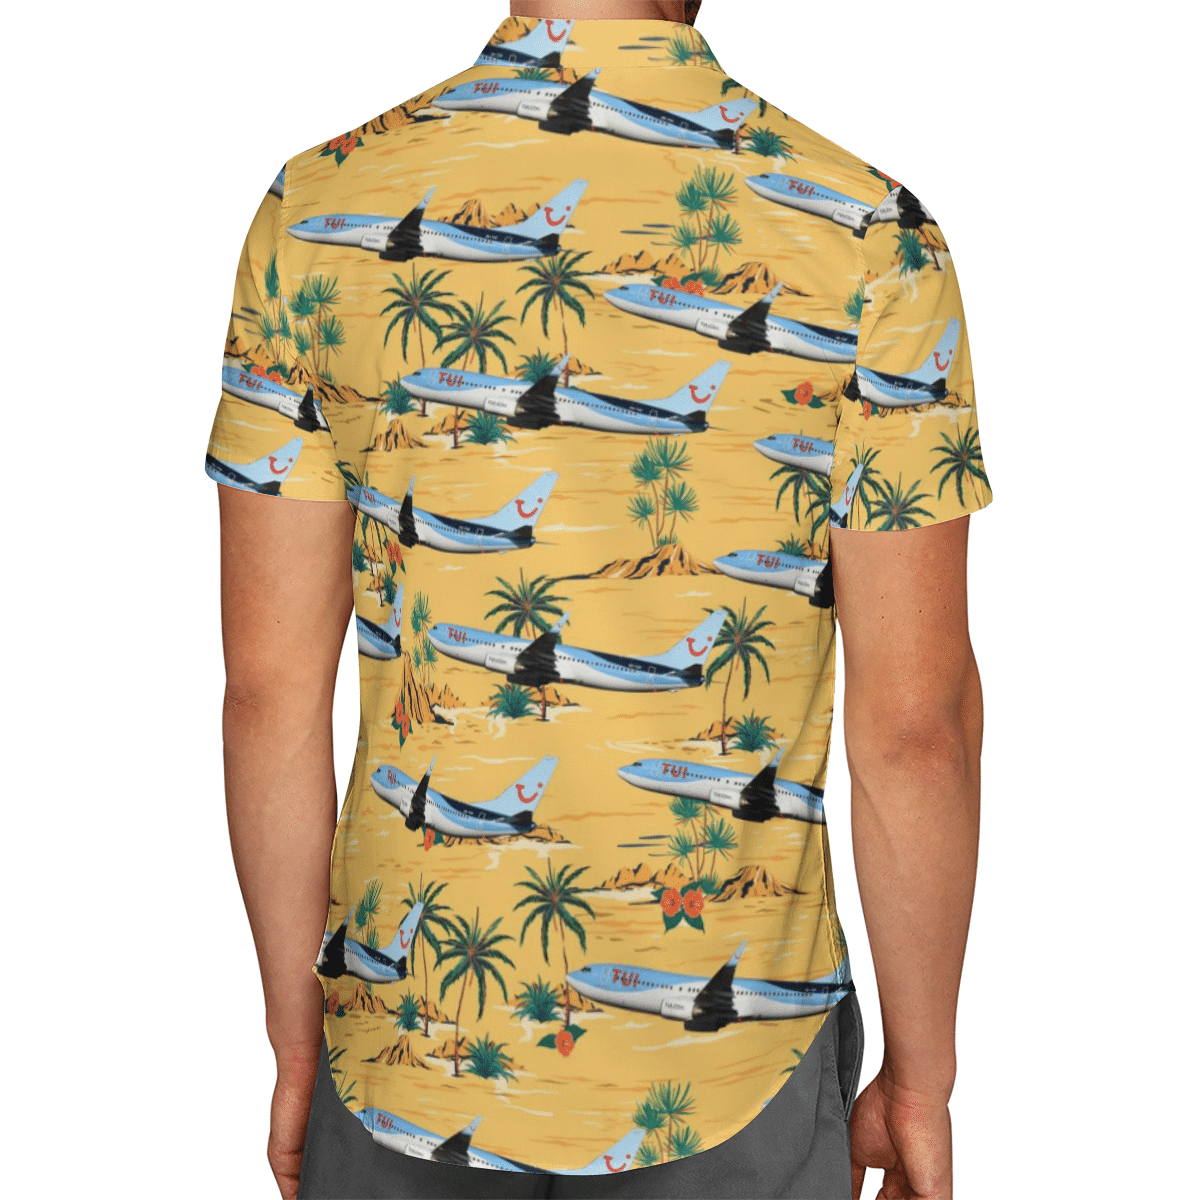 Going to the beach with a quality shirt 36